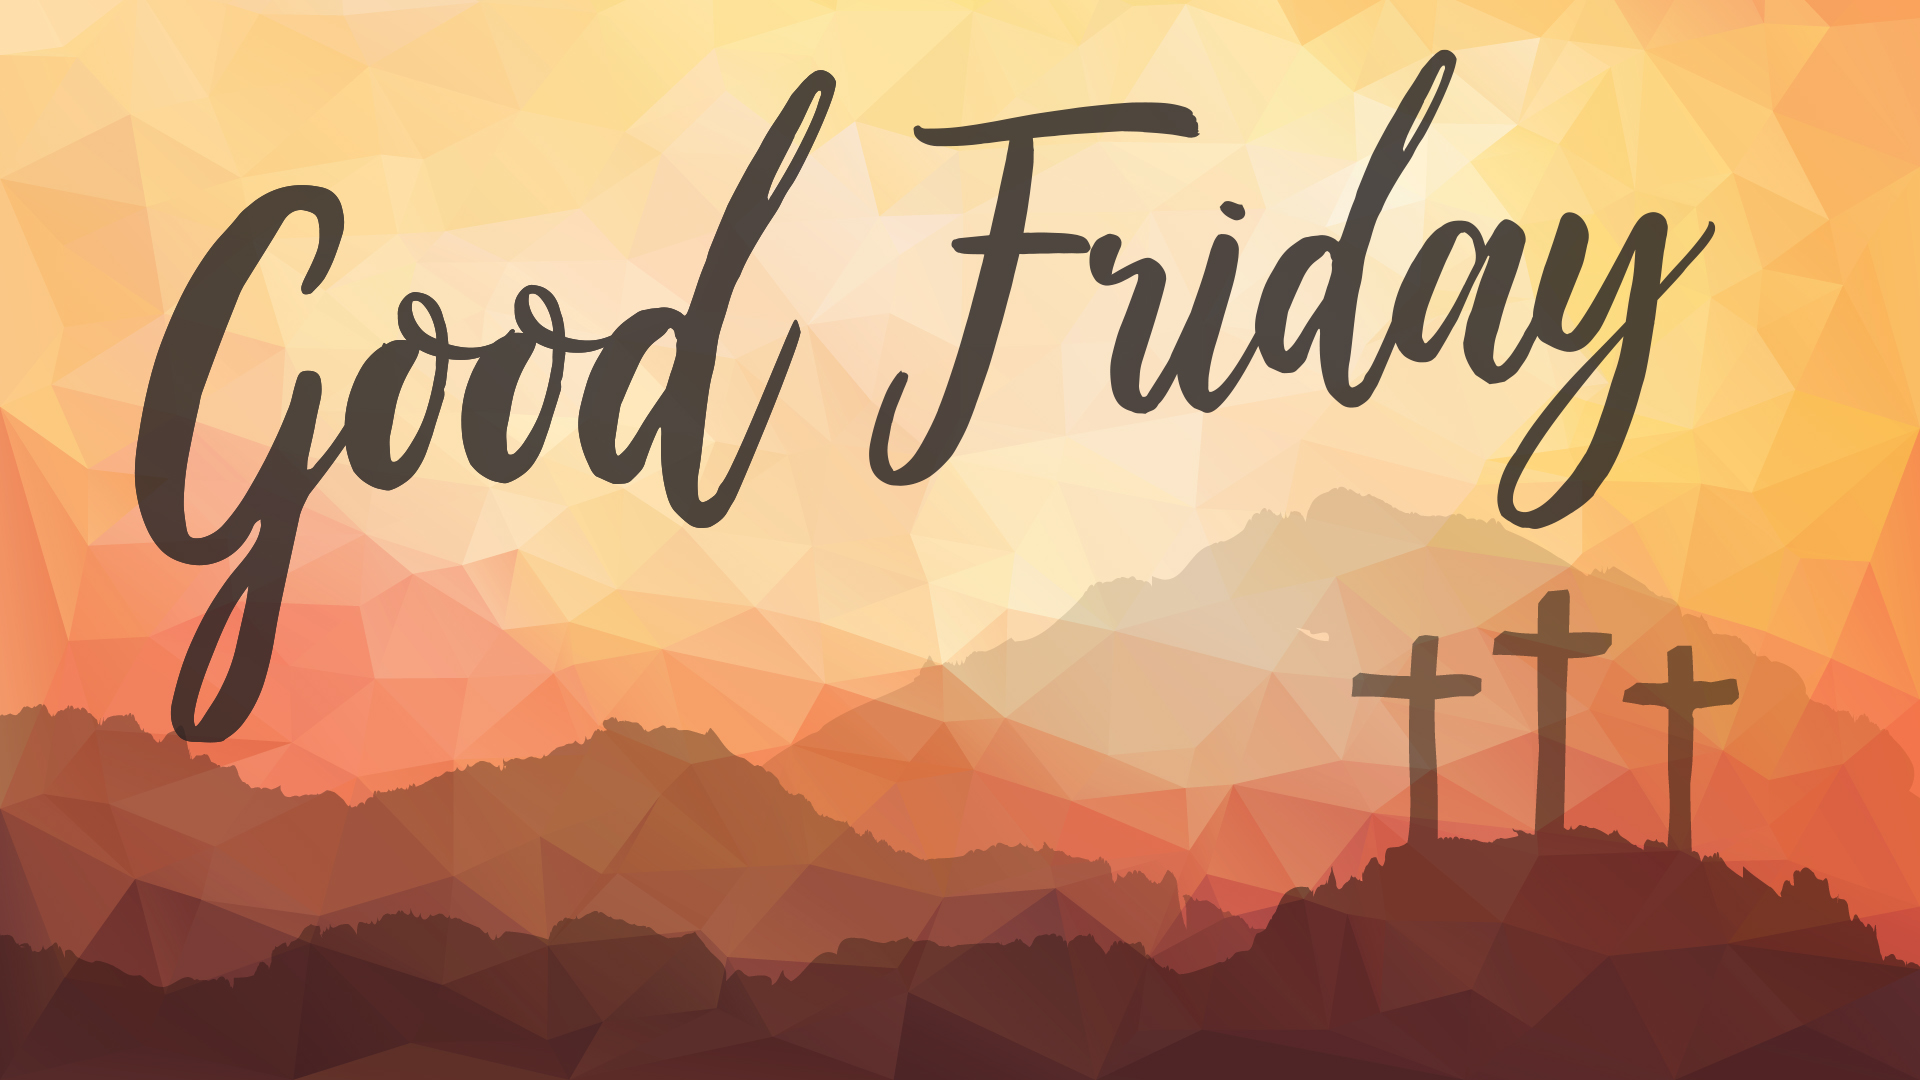 Good Friday Pictures HD Wallpapers 2019 - Good Friday New 